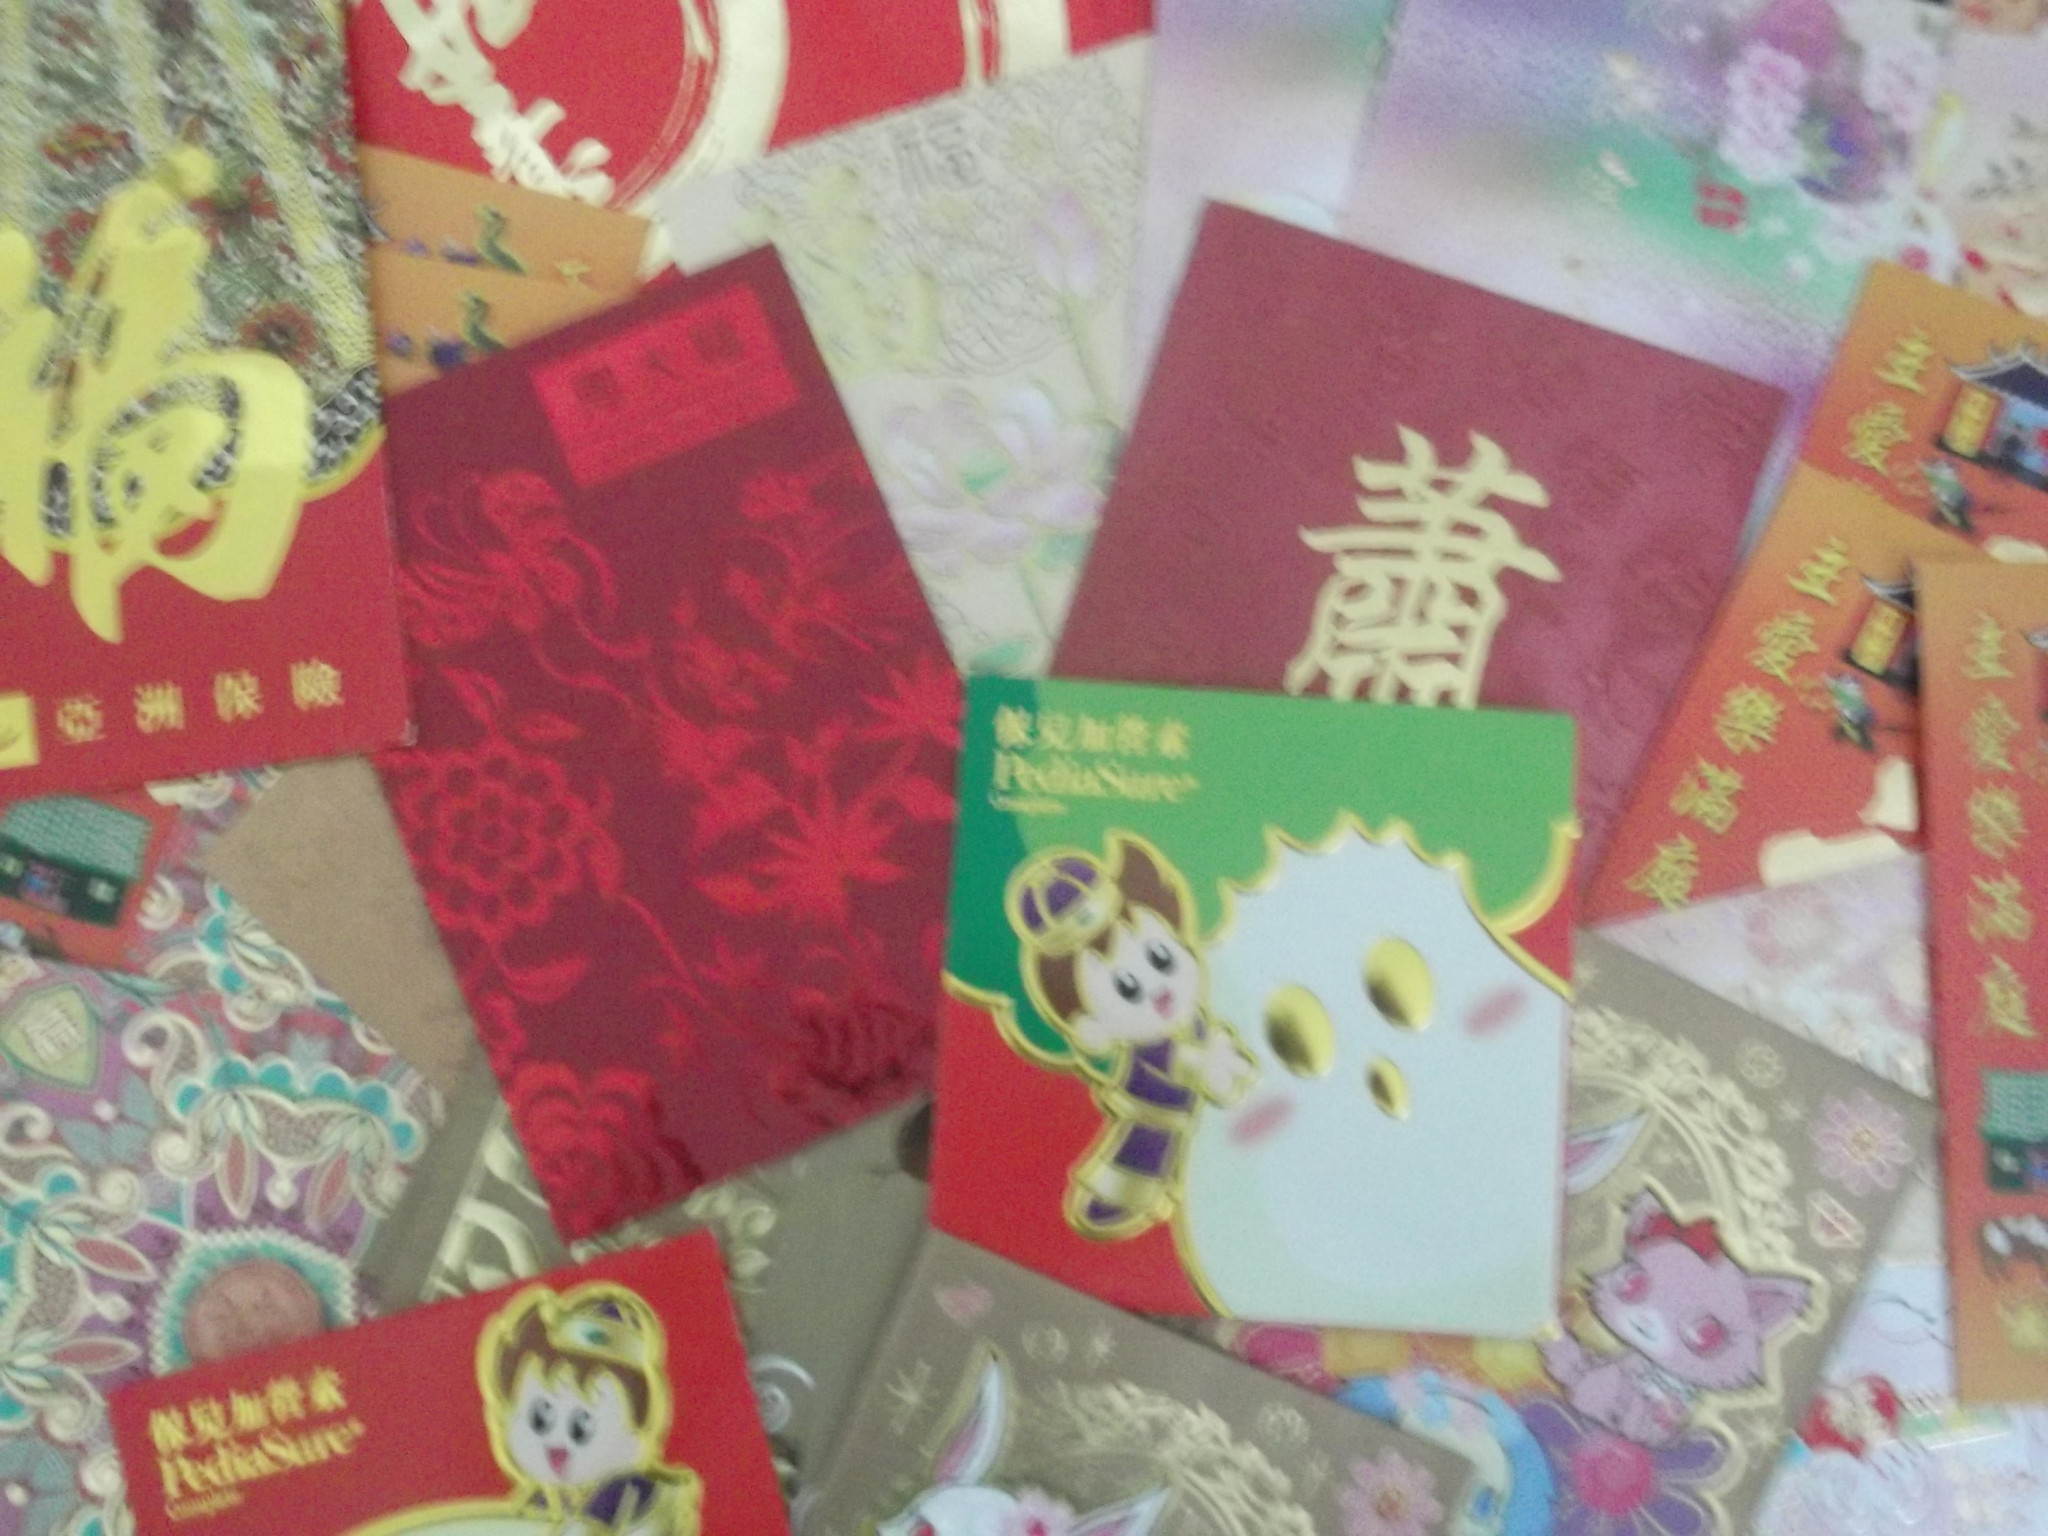 Jonny Blair talks about Chinese New Year red packets